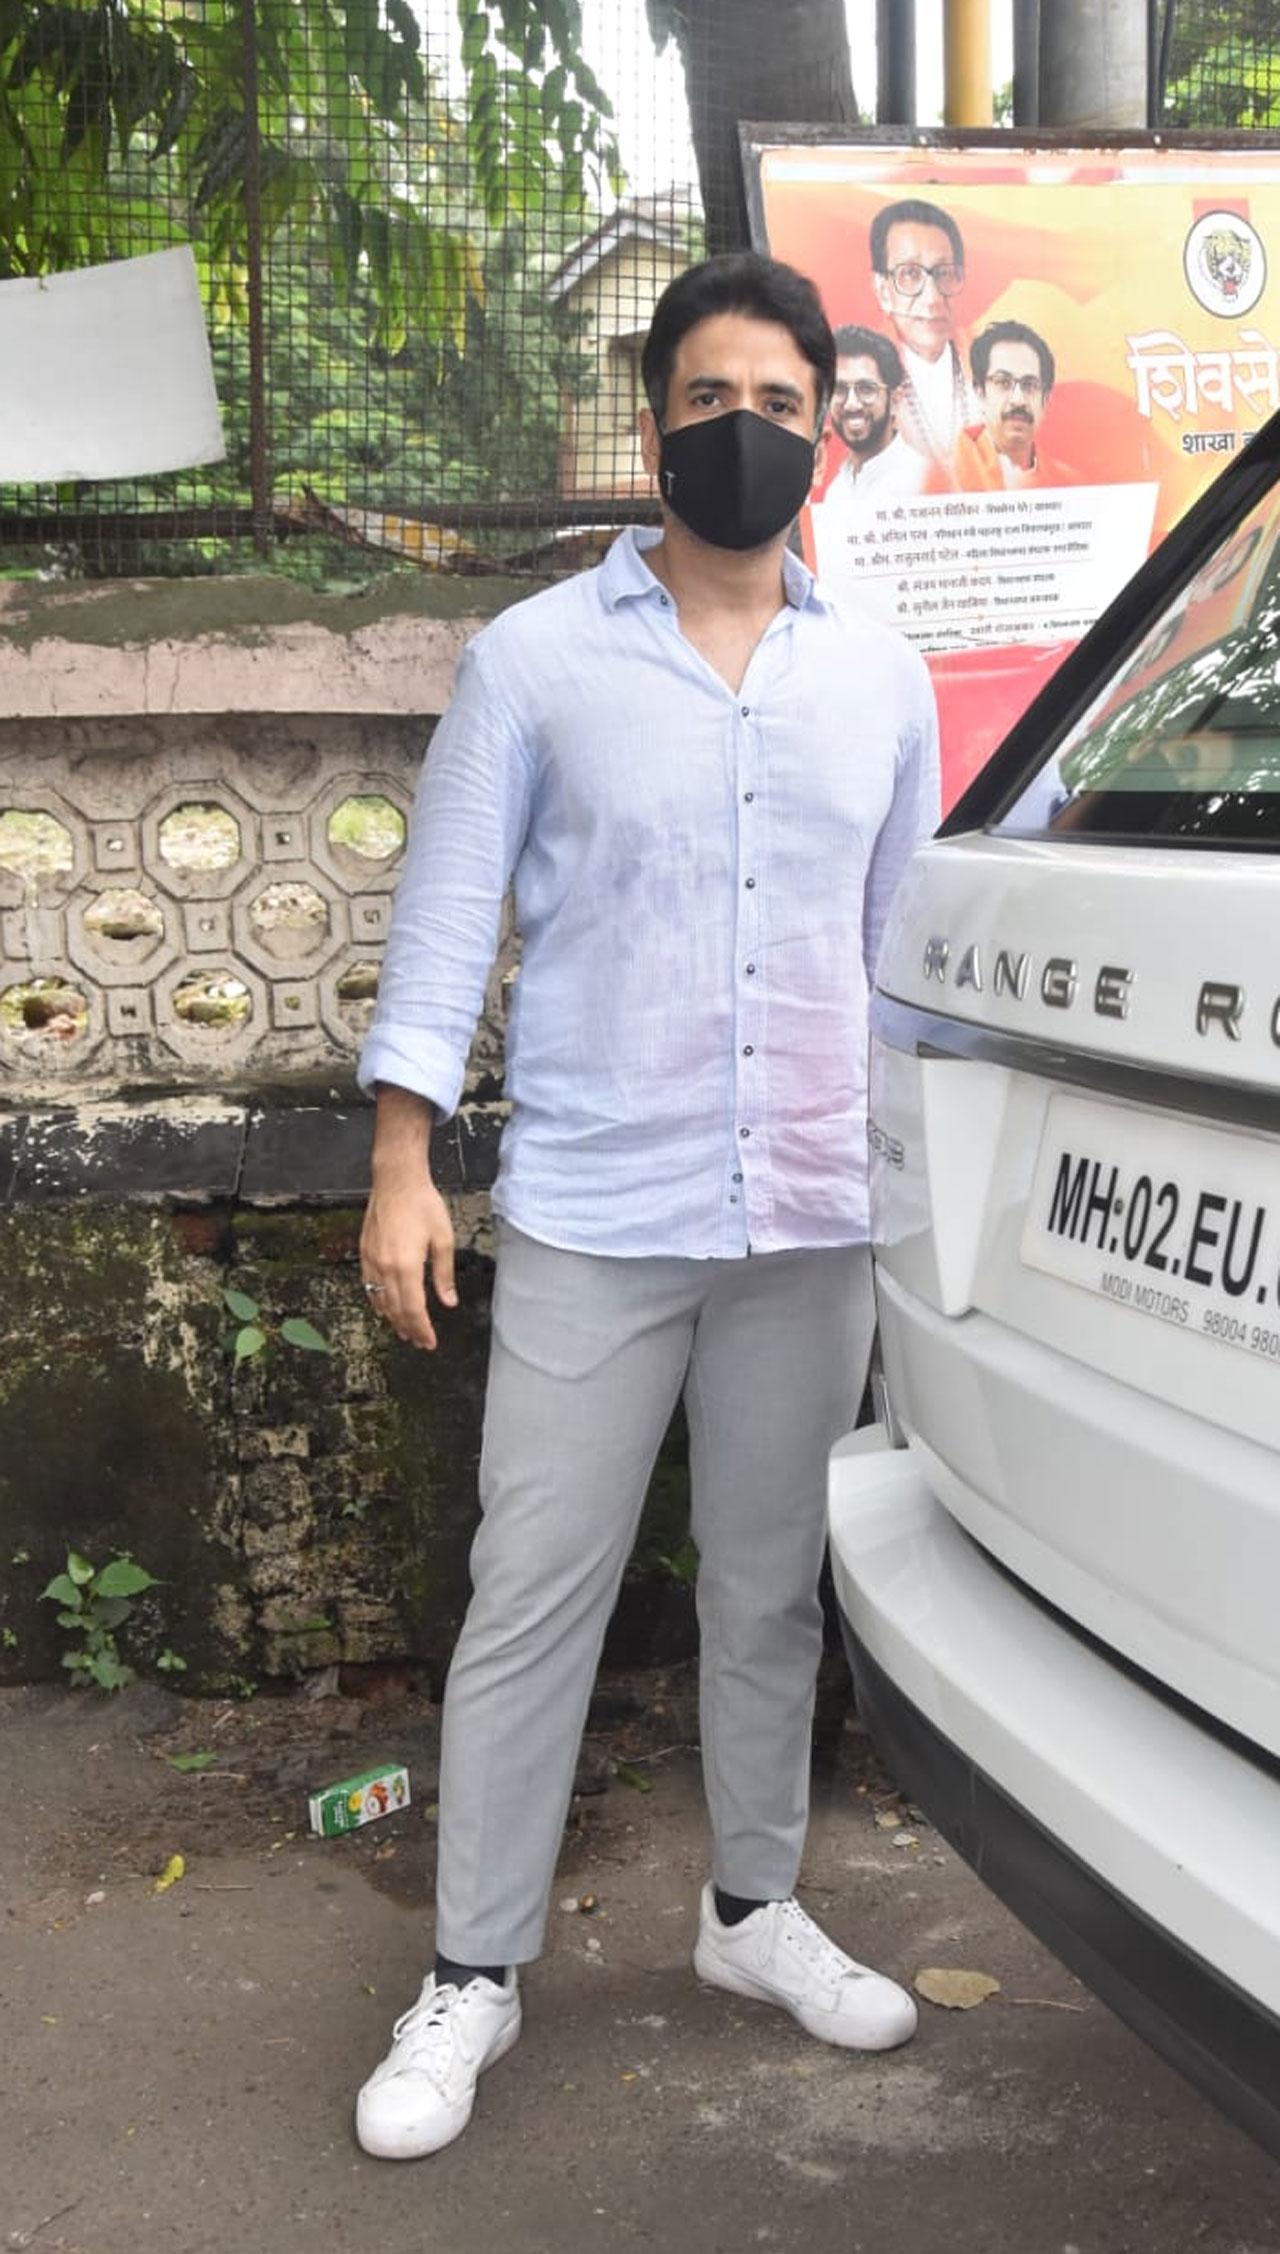 Tusshar Kapoor was clicked at Mukteshwar Temple in Juhu wearing a mask and taking all the precautions. The actor completed two years in the industry this year, he began his career in 2001 with 'Mujhe Kucch Kehna Hai'. He turned producer with Akshay Kumar's horror-comedy 'Laxmii'. 